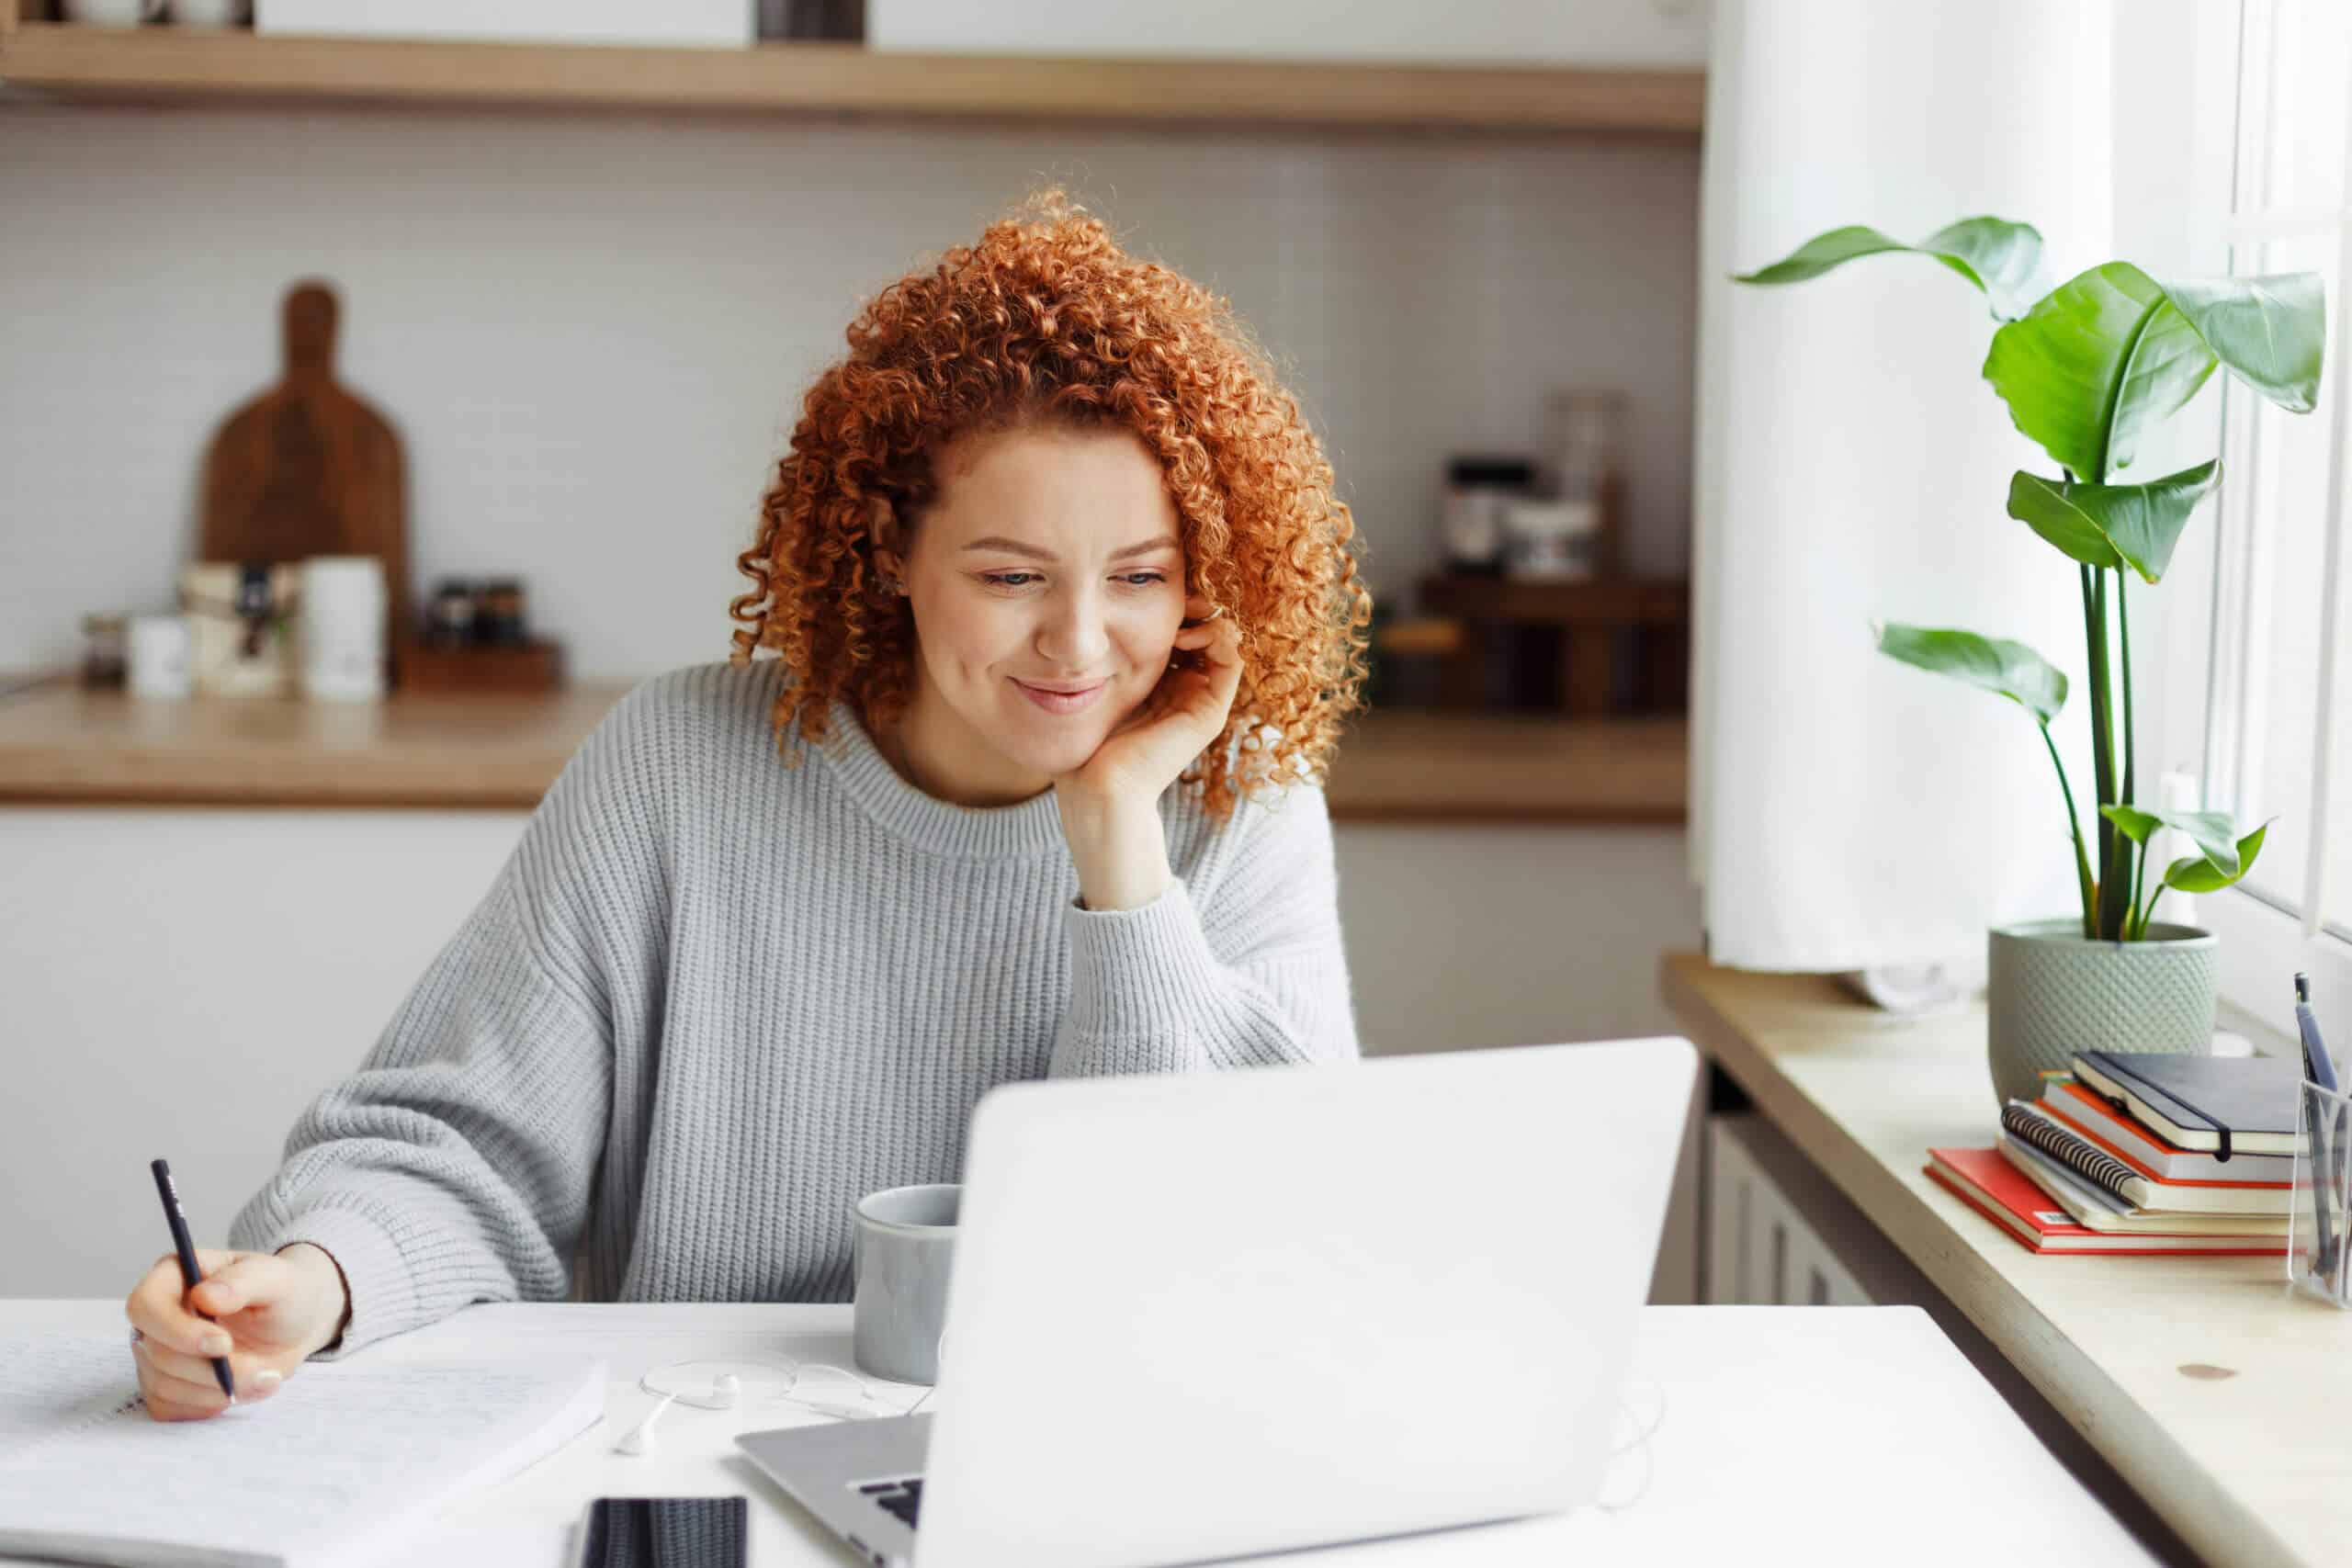 Cute girl with red curls watching online tutorial or lesson on laptop, smiling listening and looking attentively, making notes in copybook, sitting at kitchen table with smartphone and cup of coffee